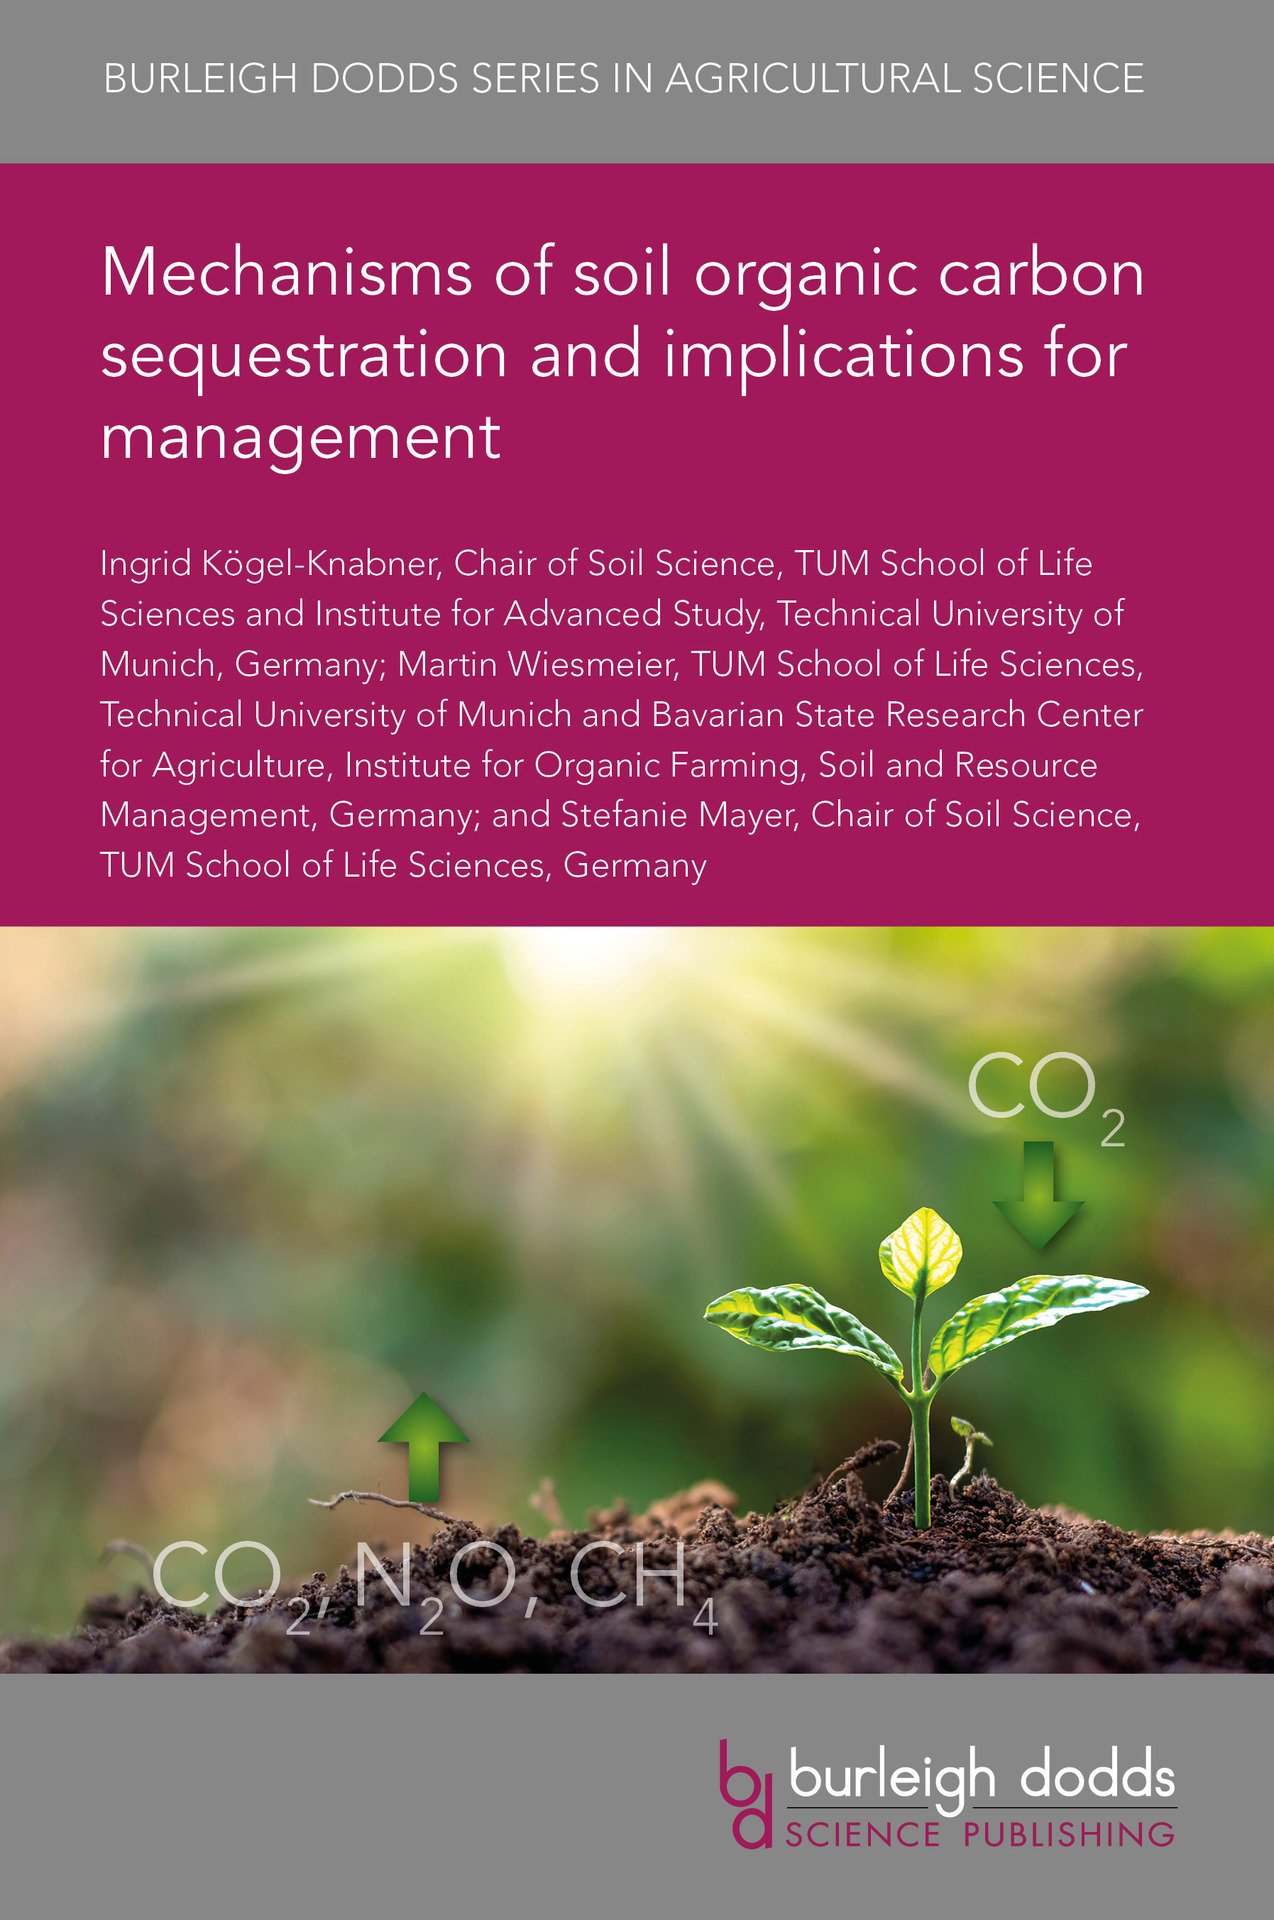 Mechanisms of soil organic carbon sequestration and implications for management